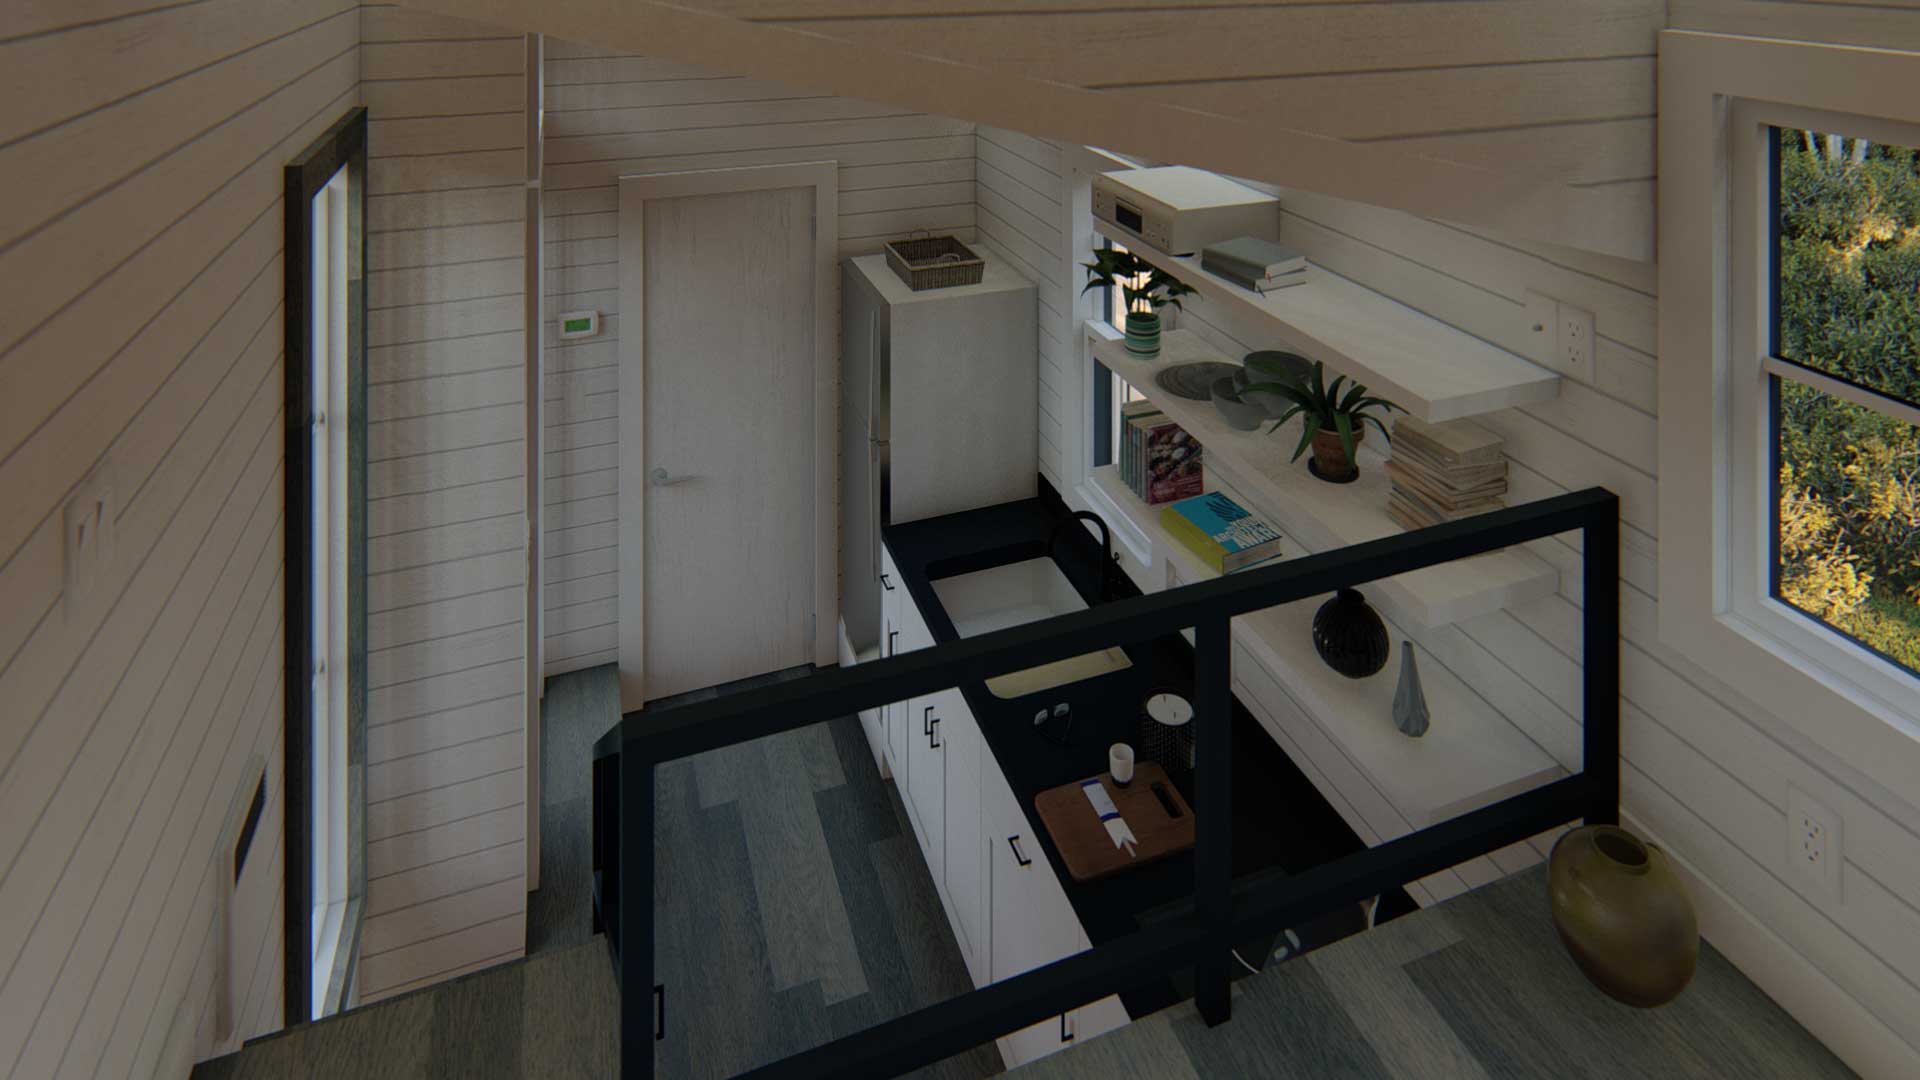 3D model of interior of the Keepsake tiny home in the farmhouse style, overhead view from loft